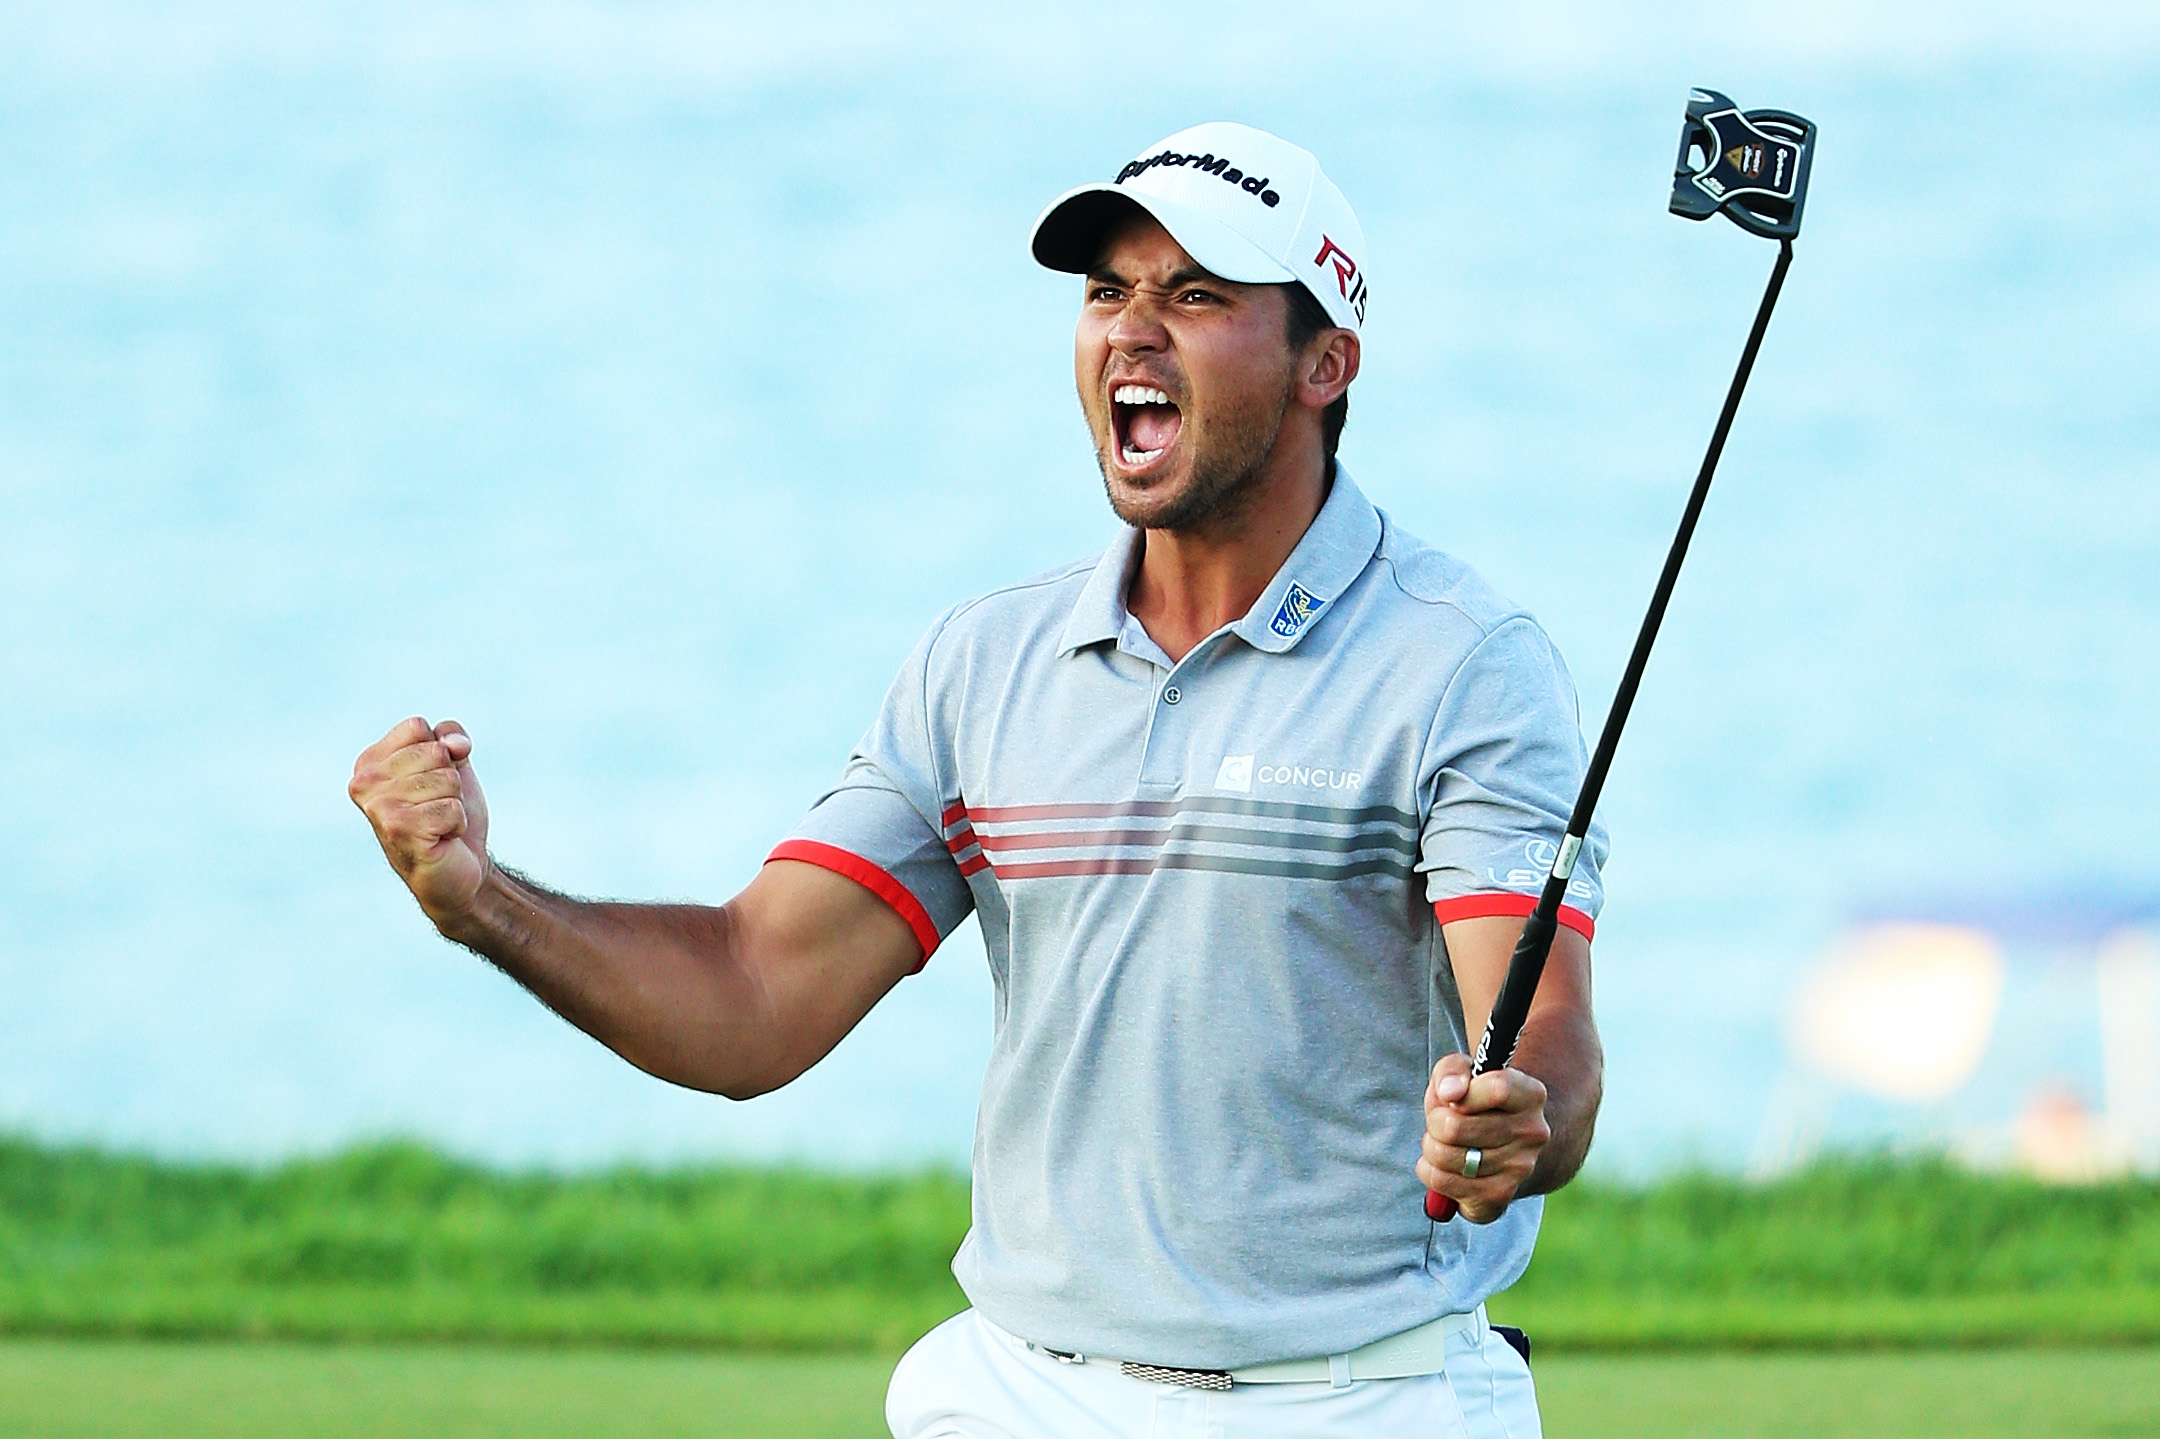 Jason Day’s Career Earnings & Wins 5 Fast Facts to Know